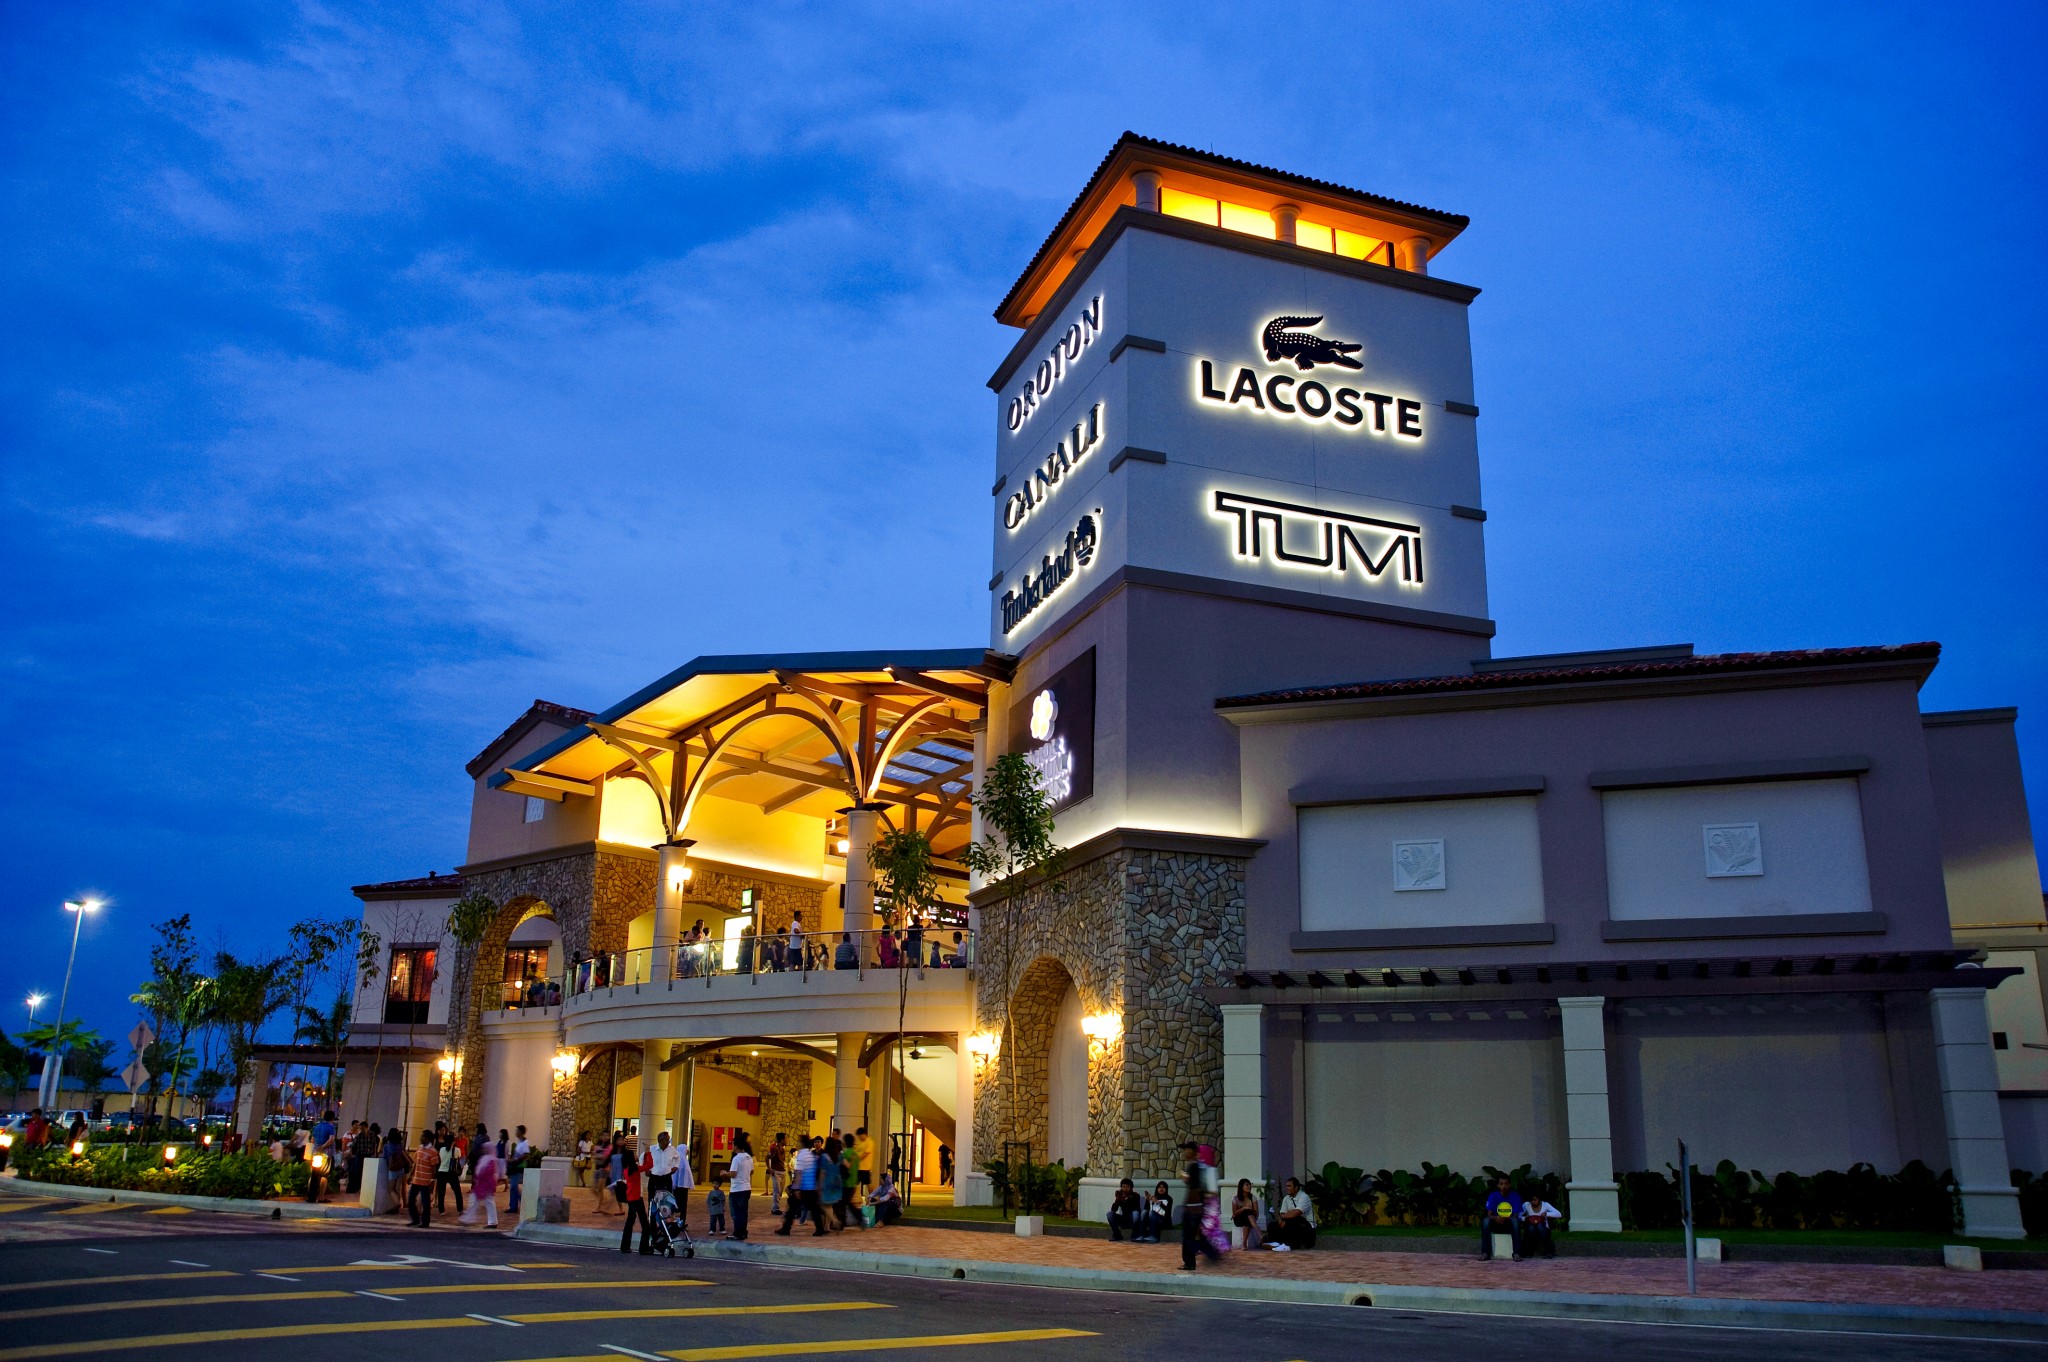 Complete list of premium outlets in Malaysia